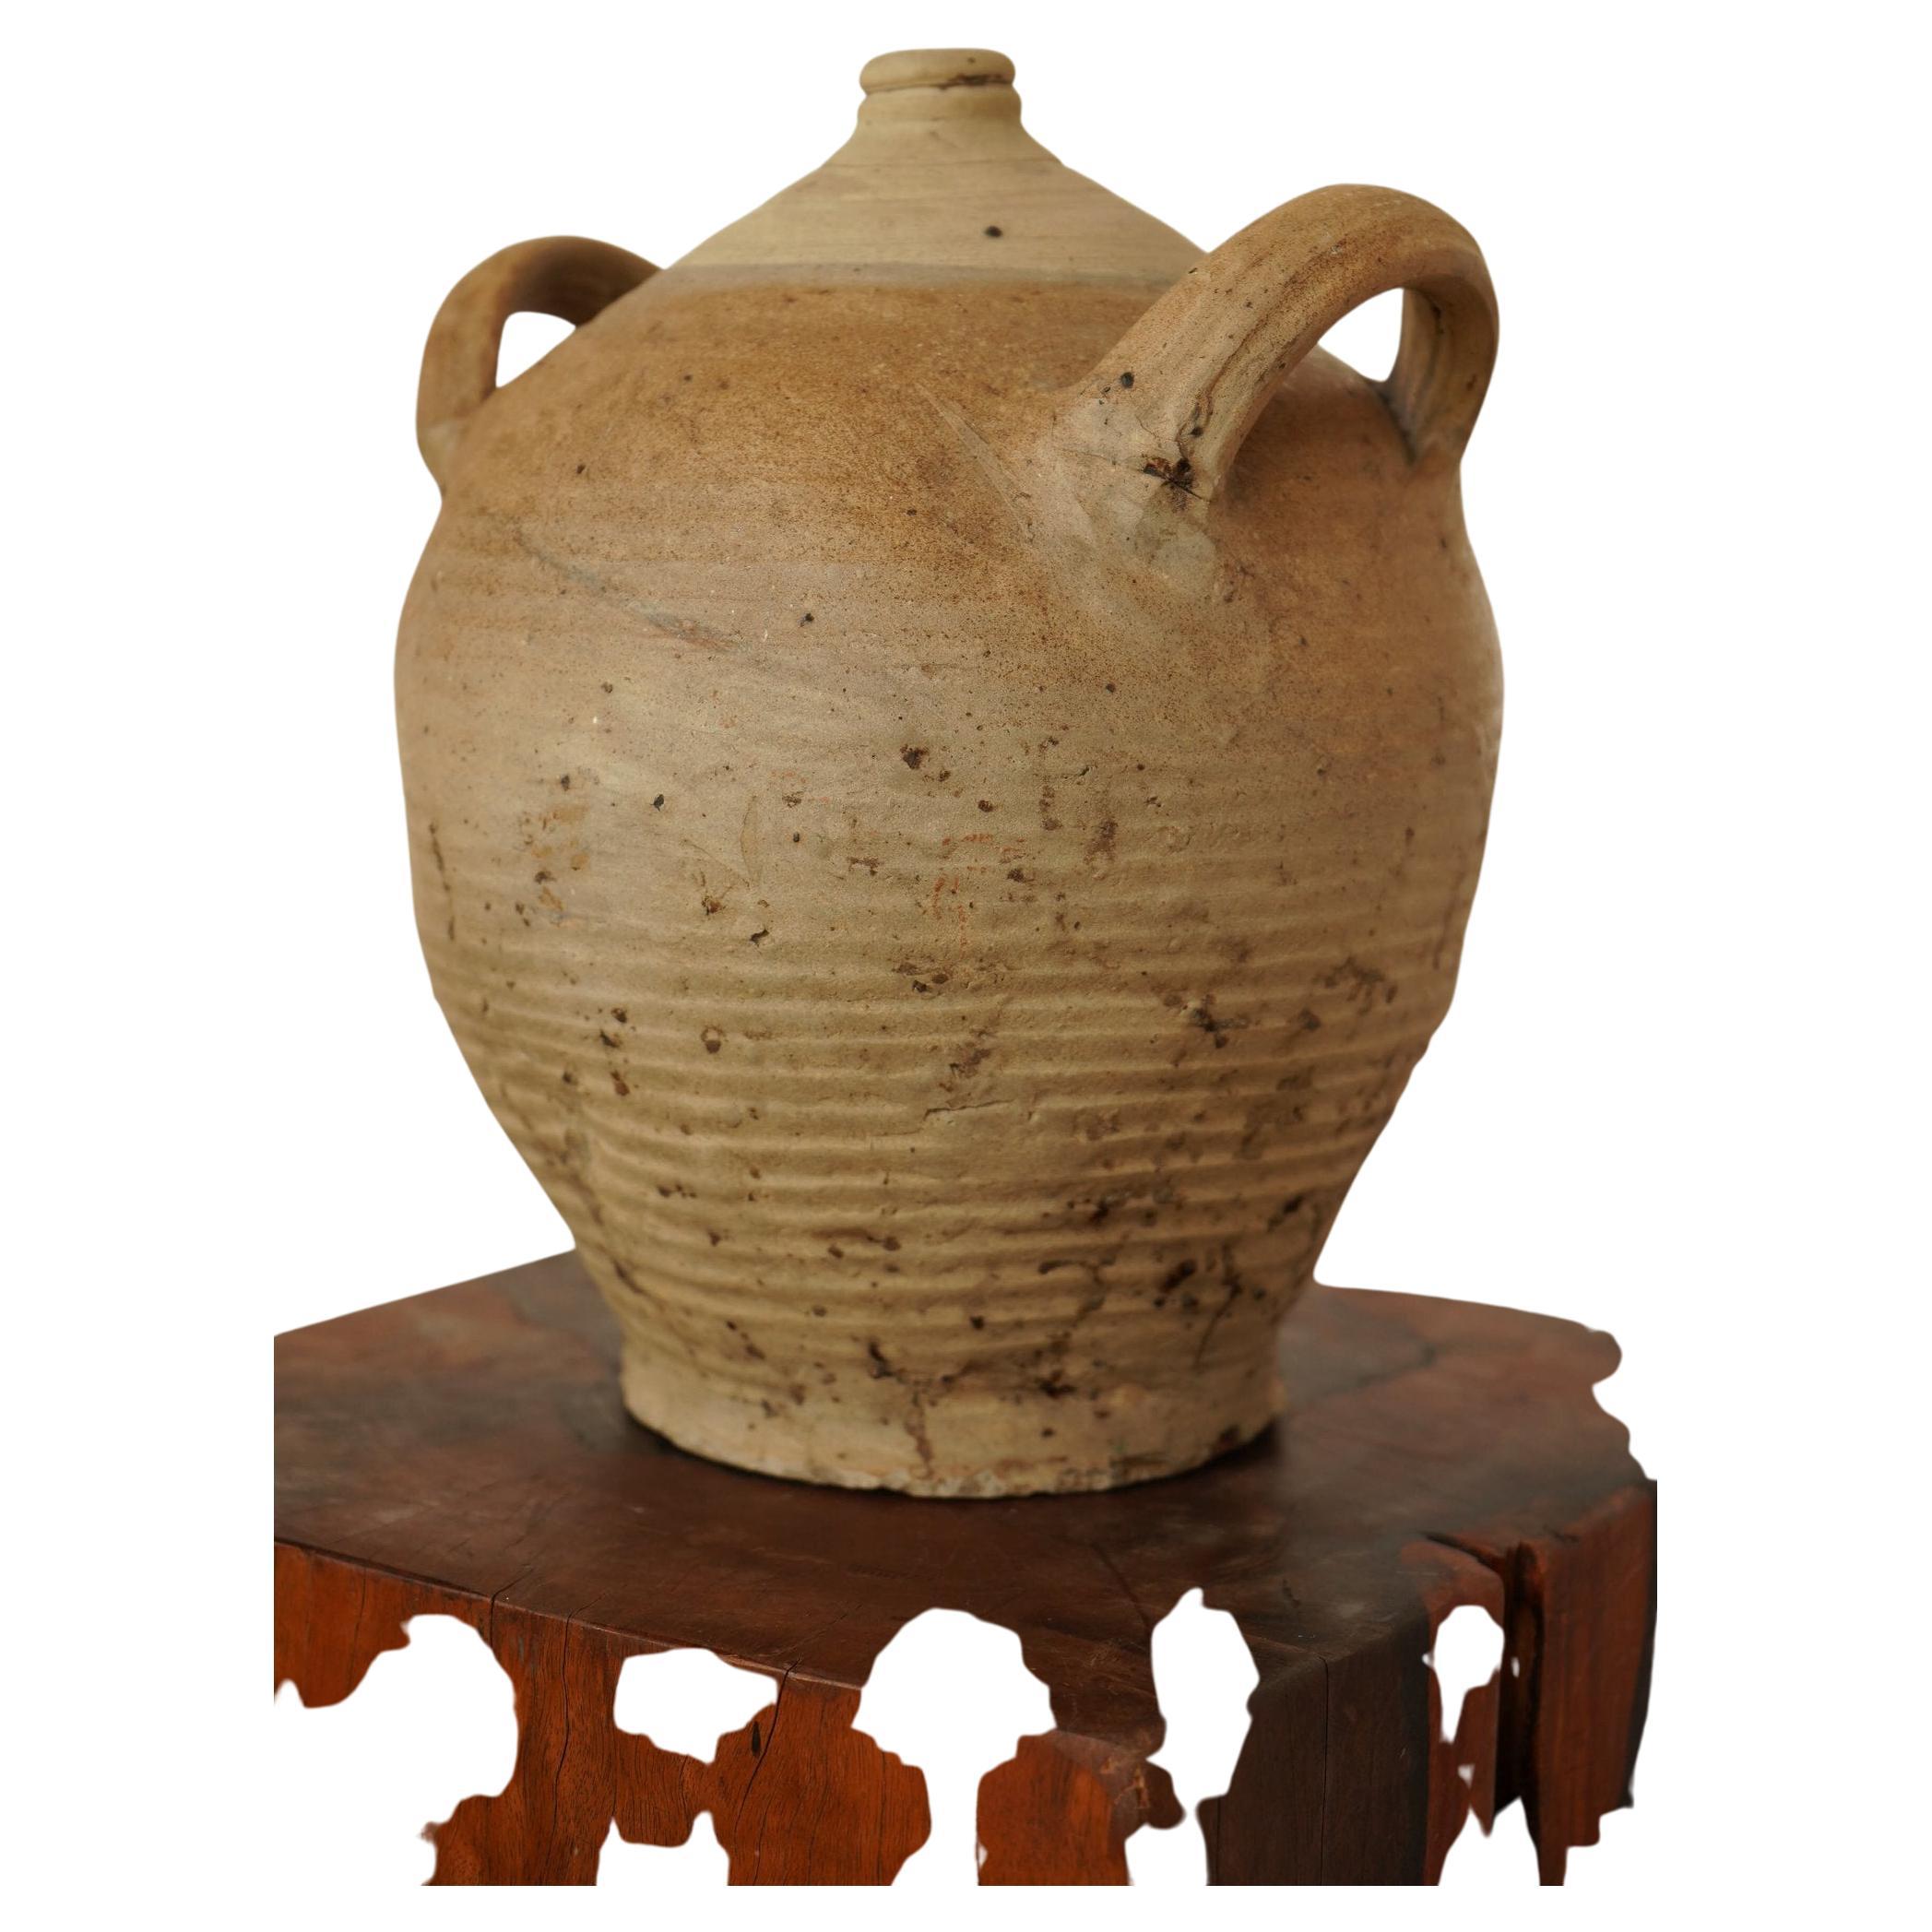 This double handled earthenware jug of pottery has a narrow mouth and two handles.